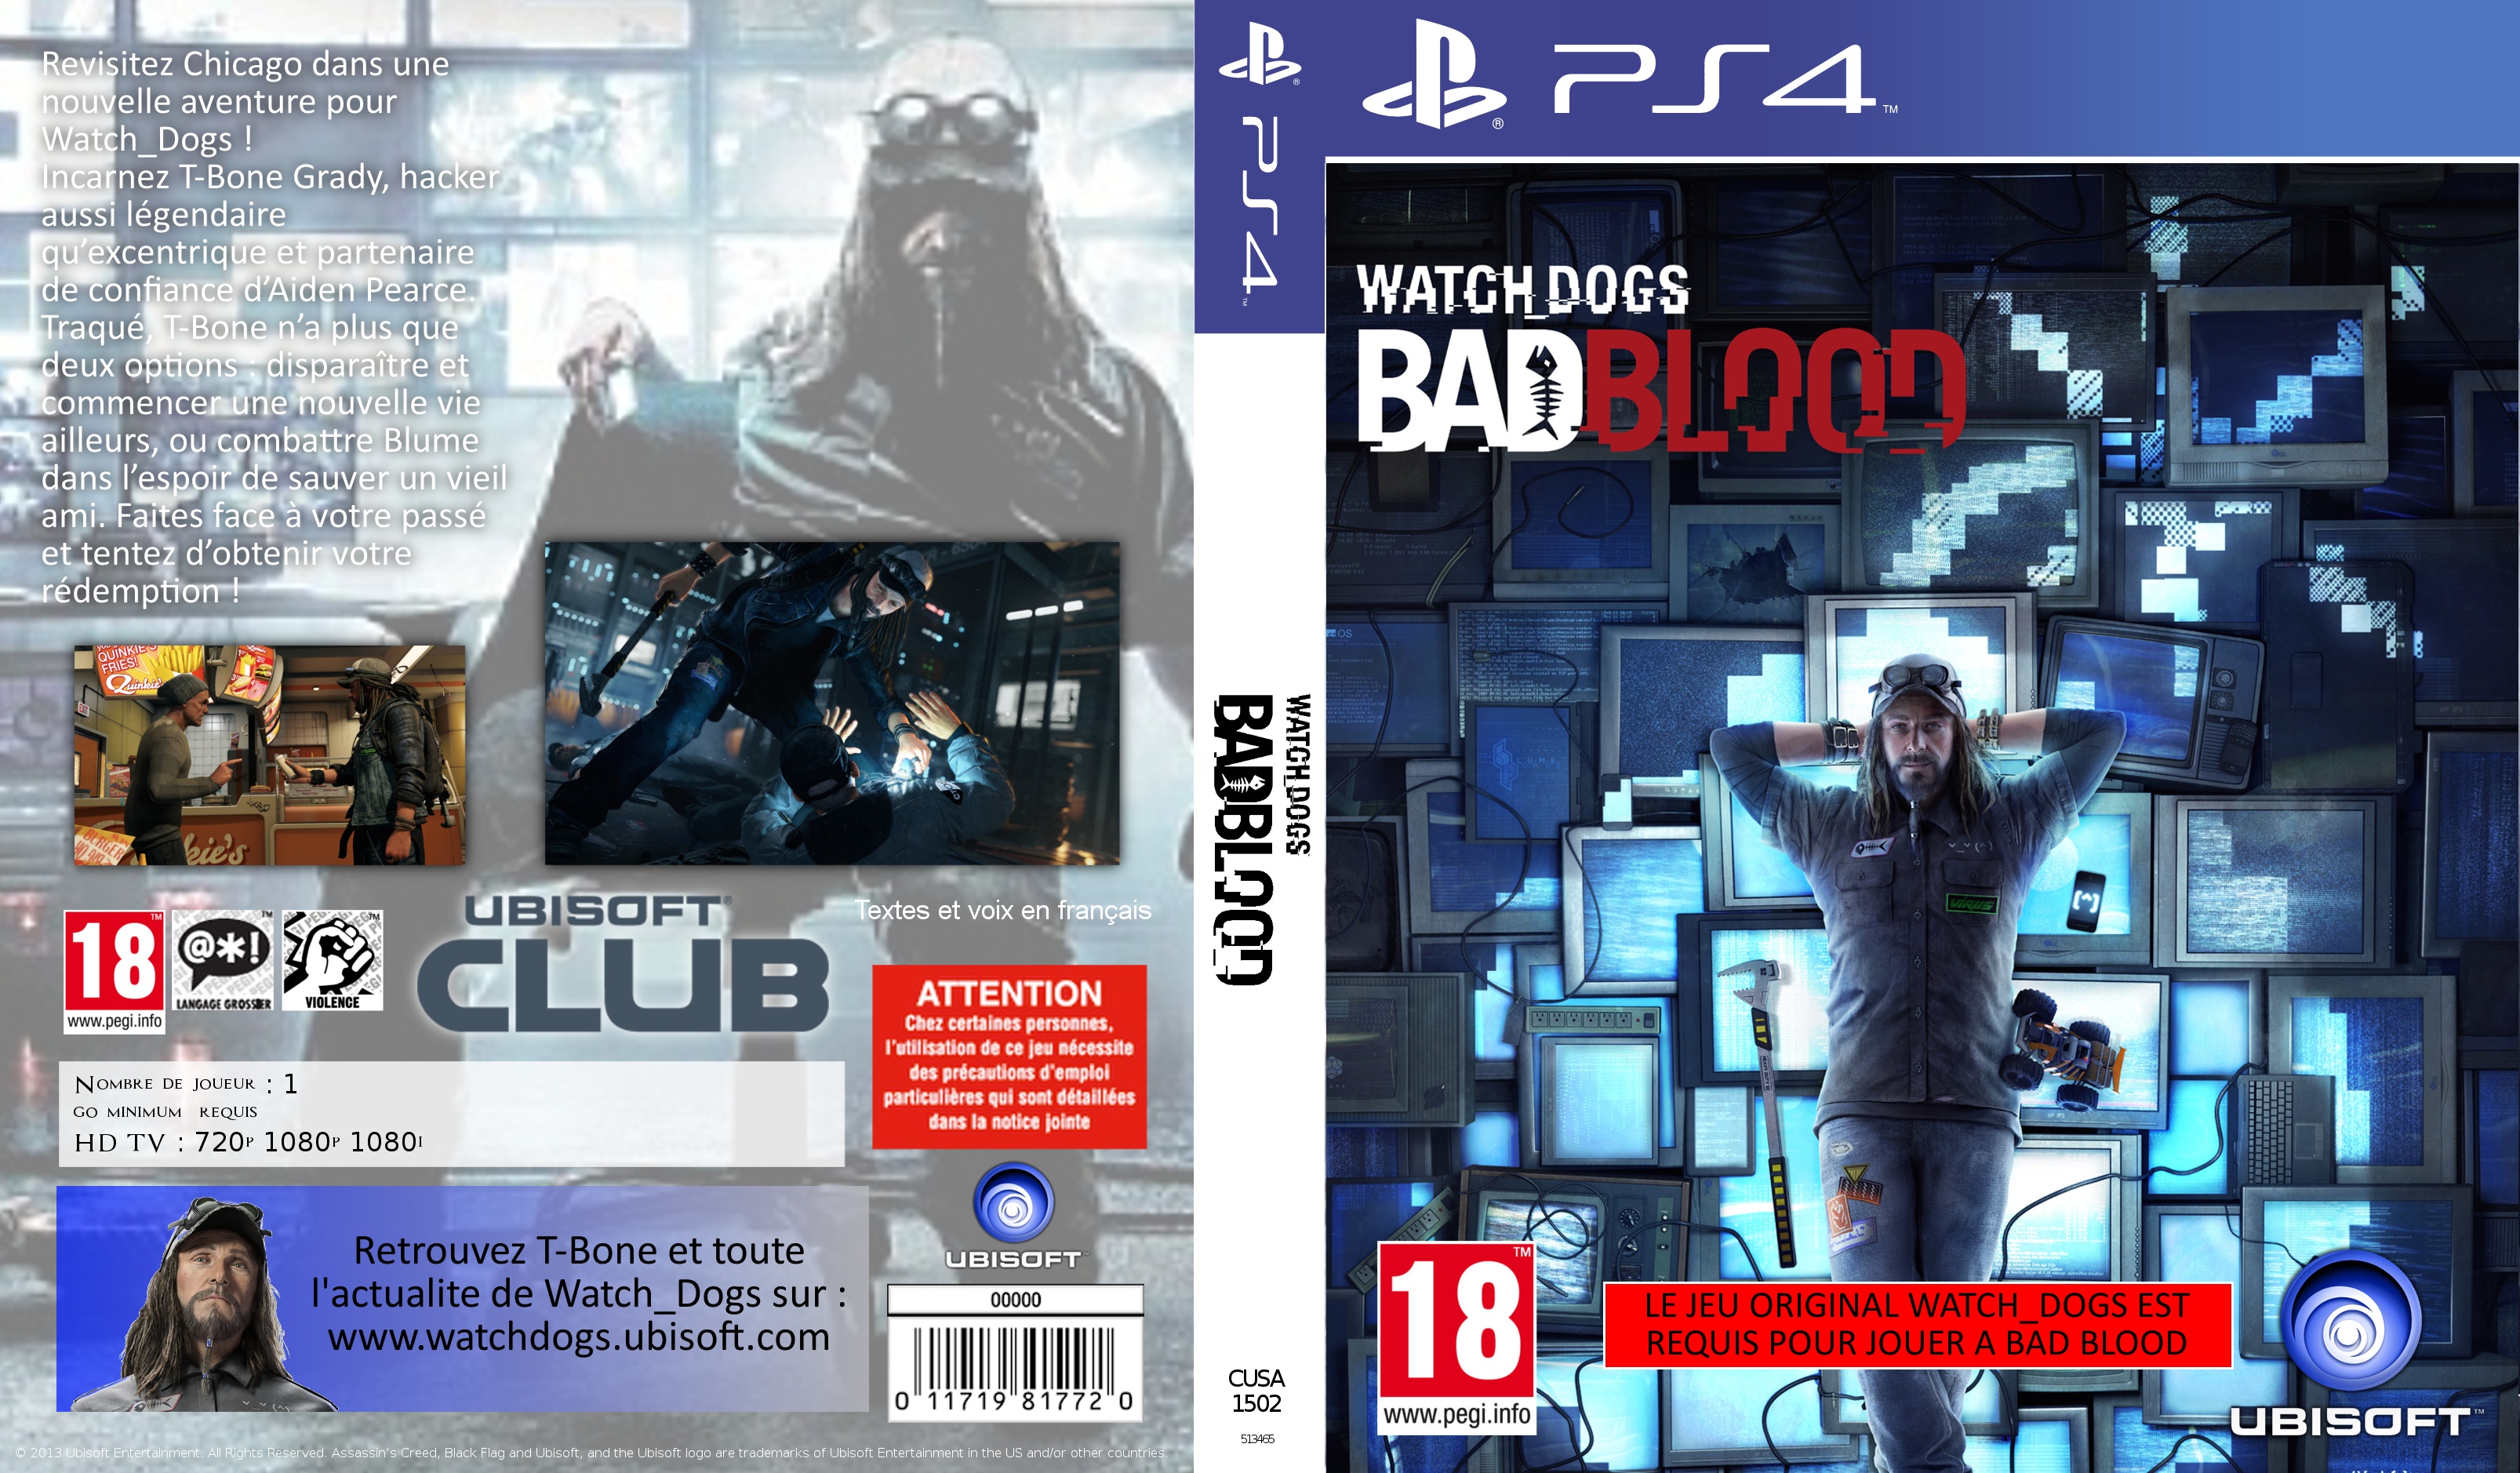 Watch_Dogs Bad Blood box cover